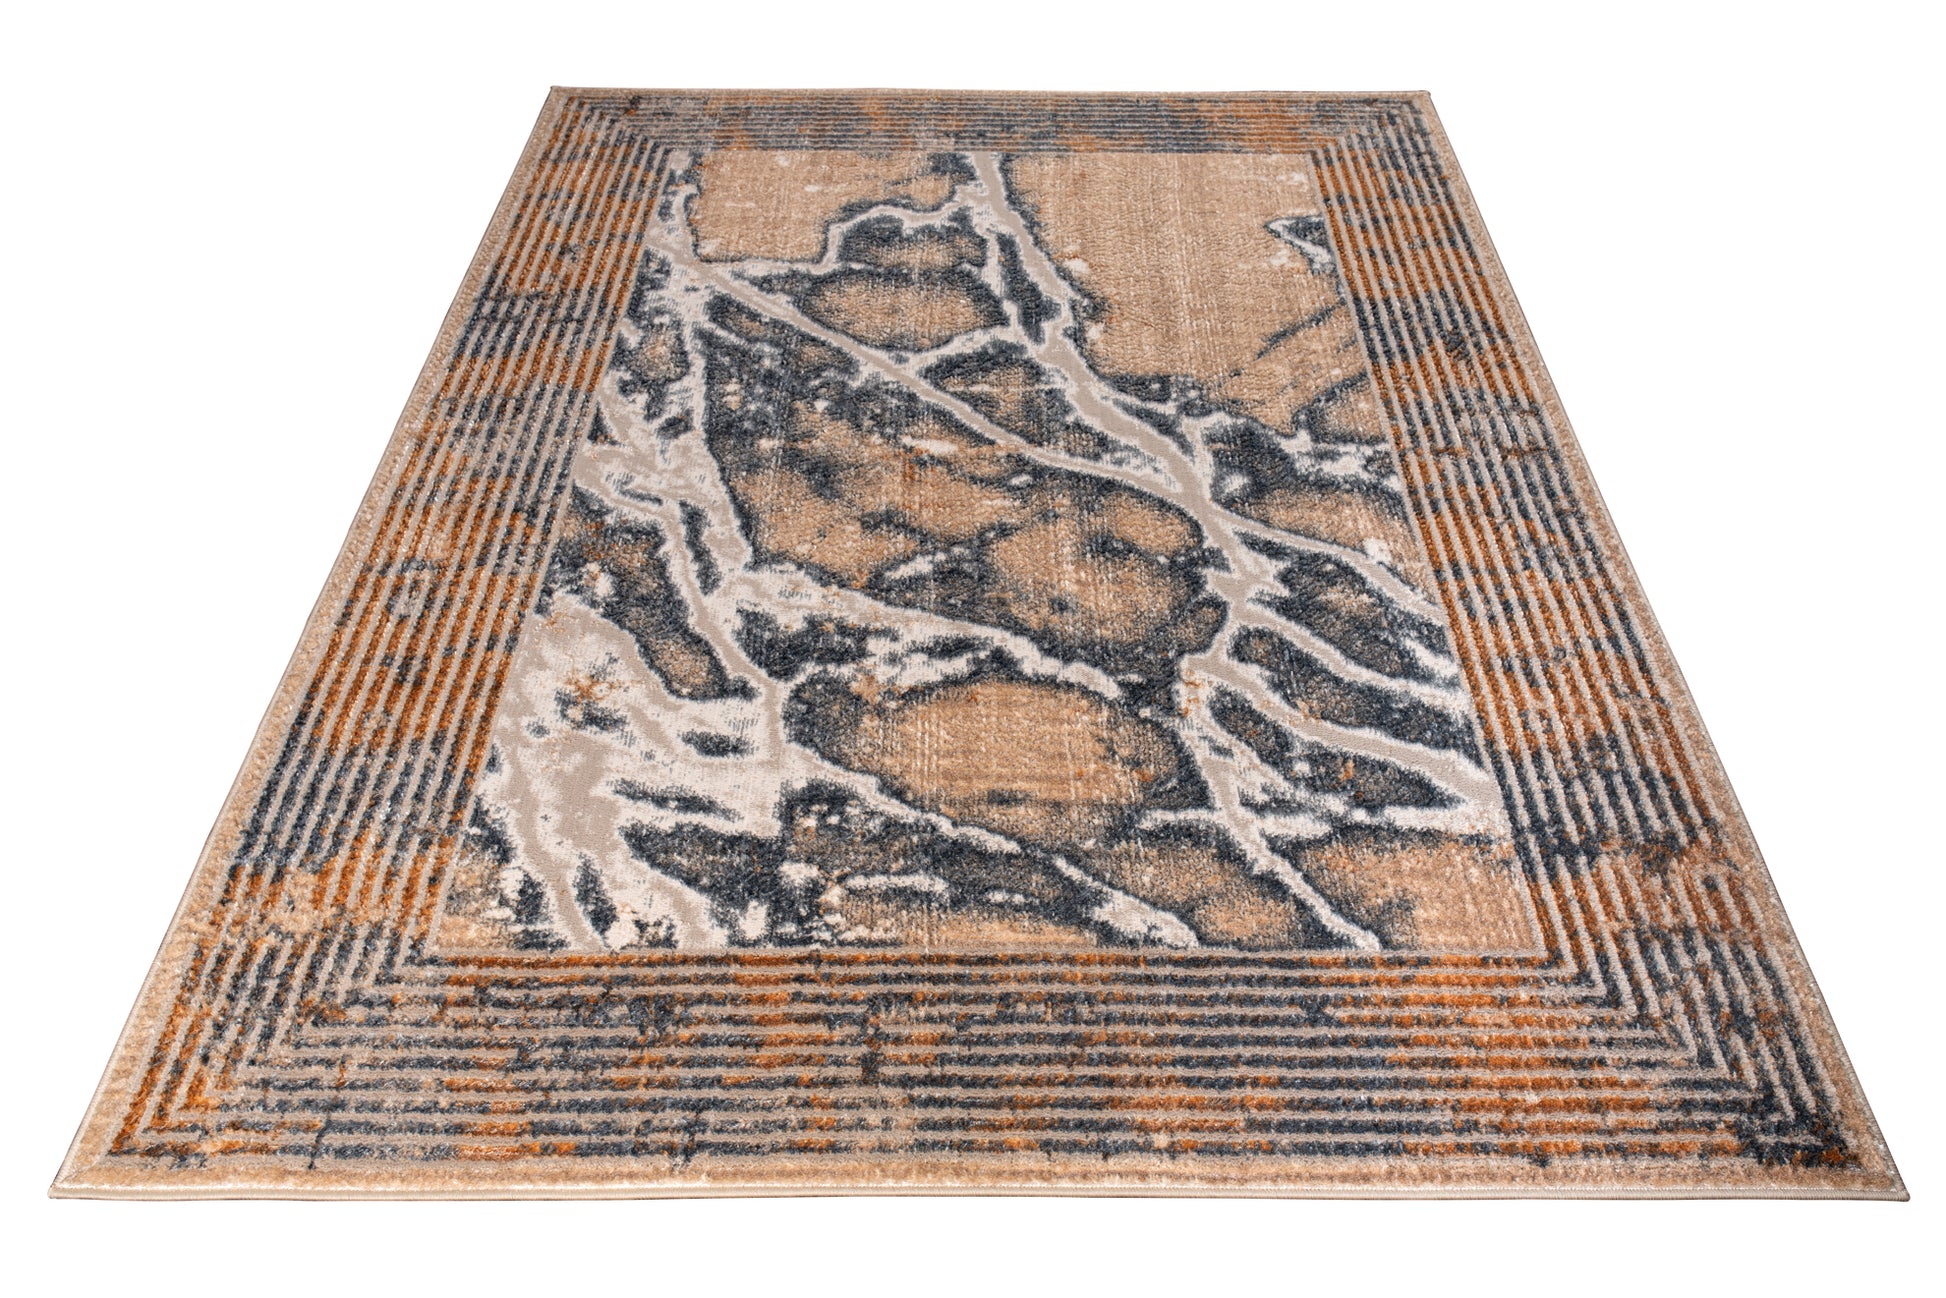 beige brown grey metalic abstract modern contemporary marble pattern bordered area rug 6x8, 6x9 ft Living Room, Bedroom, Dining Area, Kitchen Carpet